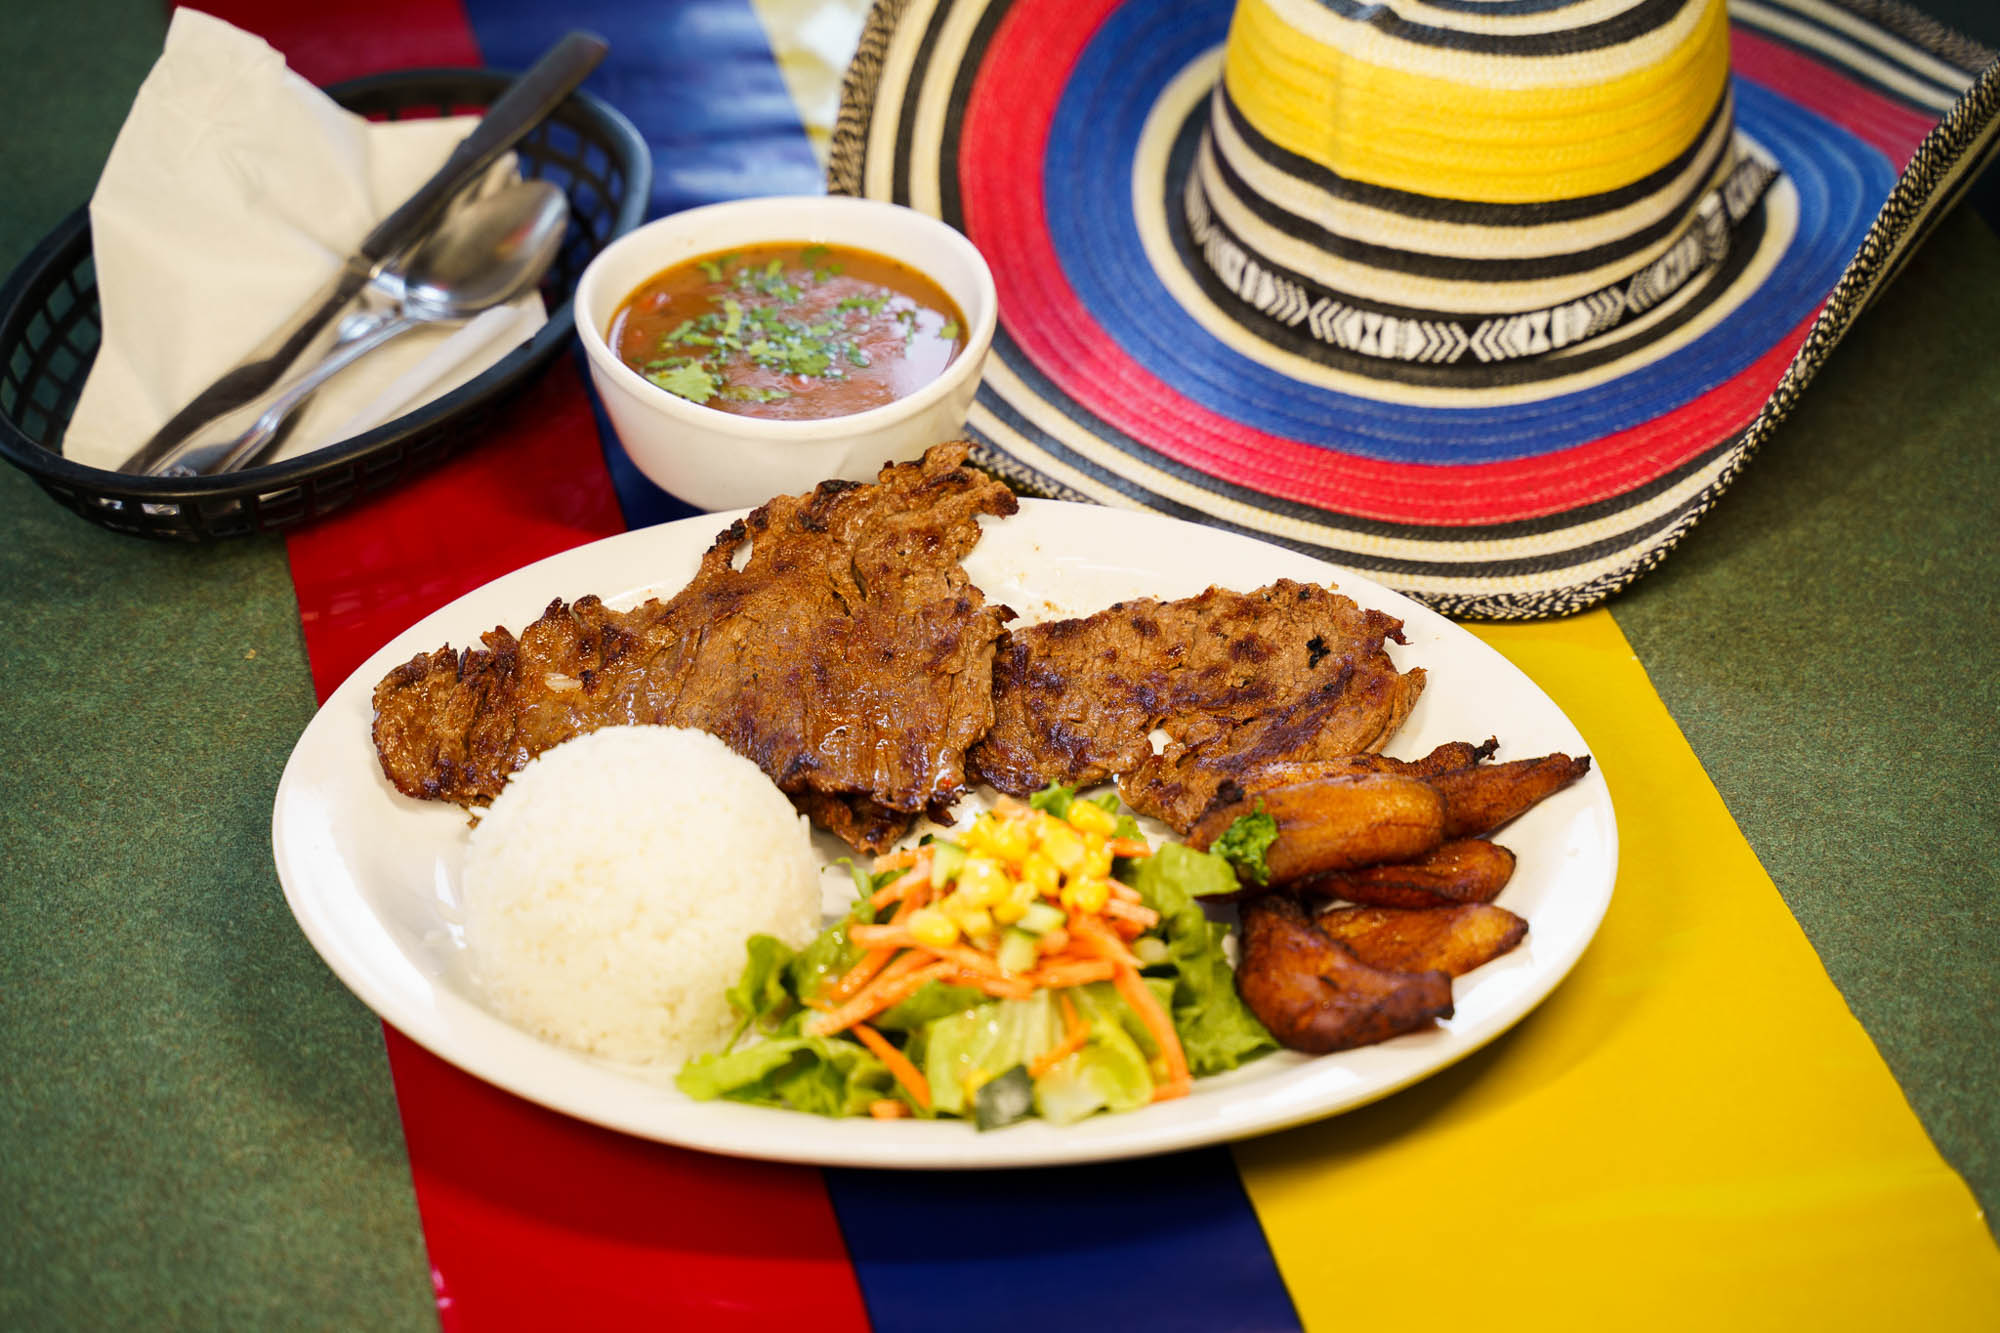 Grilled steak, served with white rice, beans, fried plantain, and salad